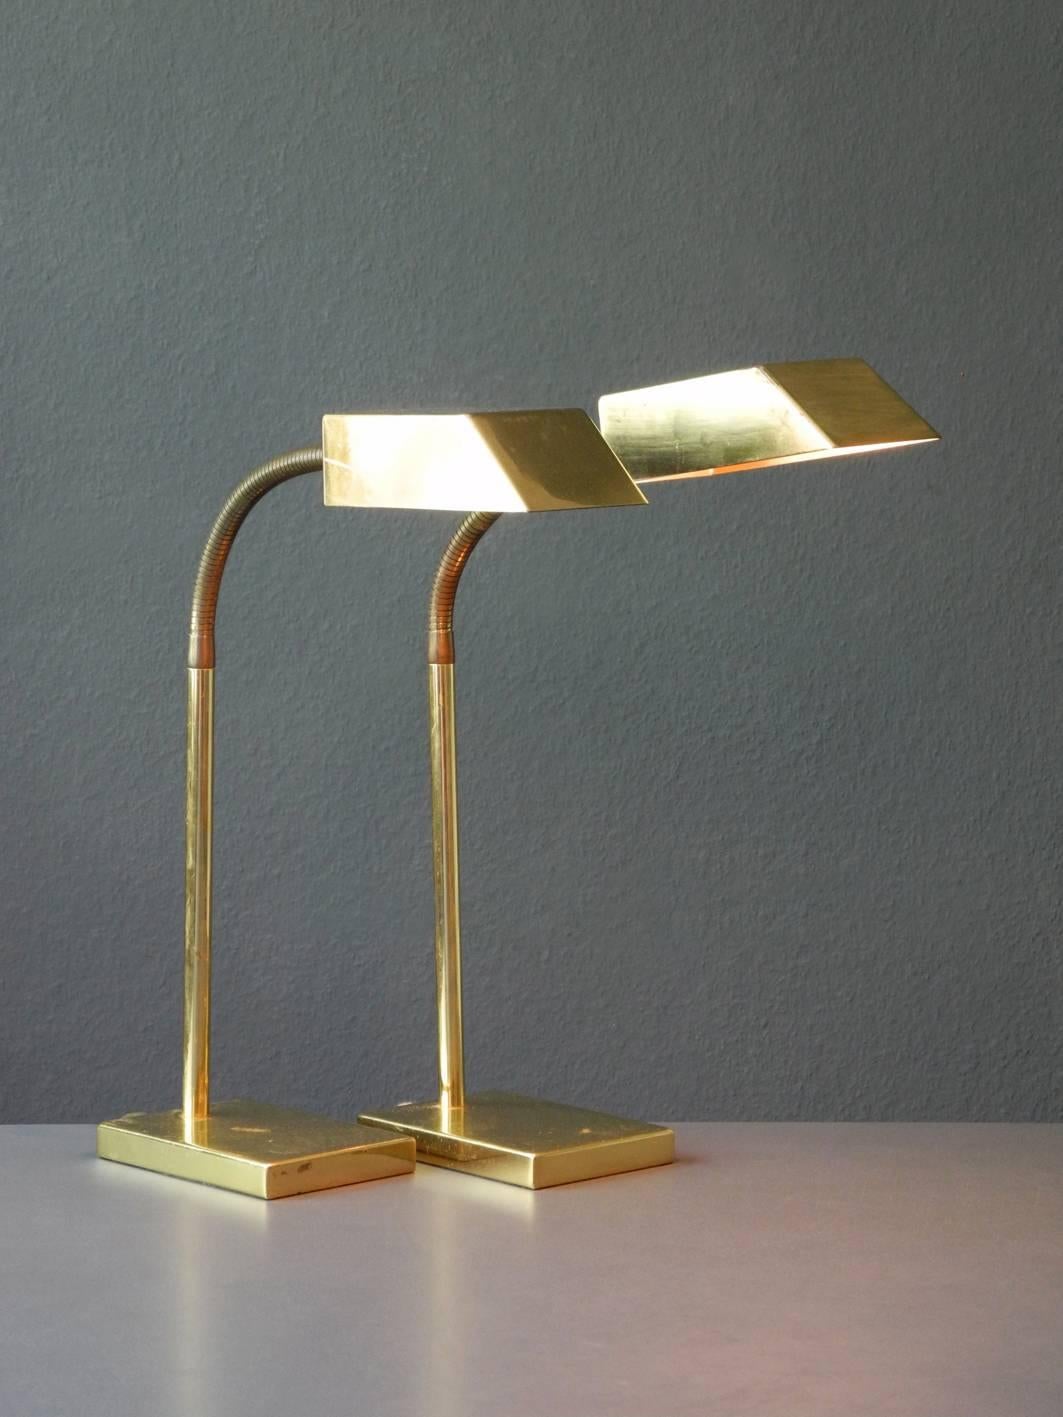 Pair of very large Mid-Century Modern table lamps from the Vereinigte Werkstätten. Made in Germany. Great minimalistic design in original vintage condition. Completely made of solid brass. Flexible neck, steplessly adjustable in all directions.